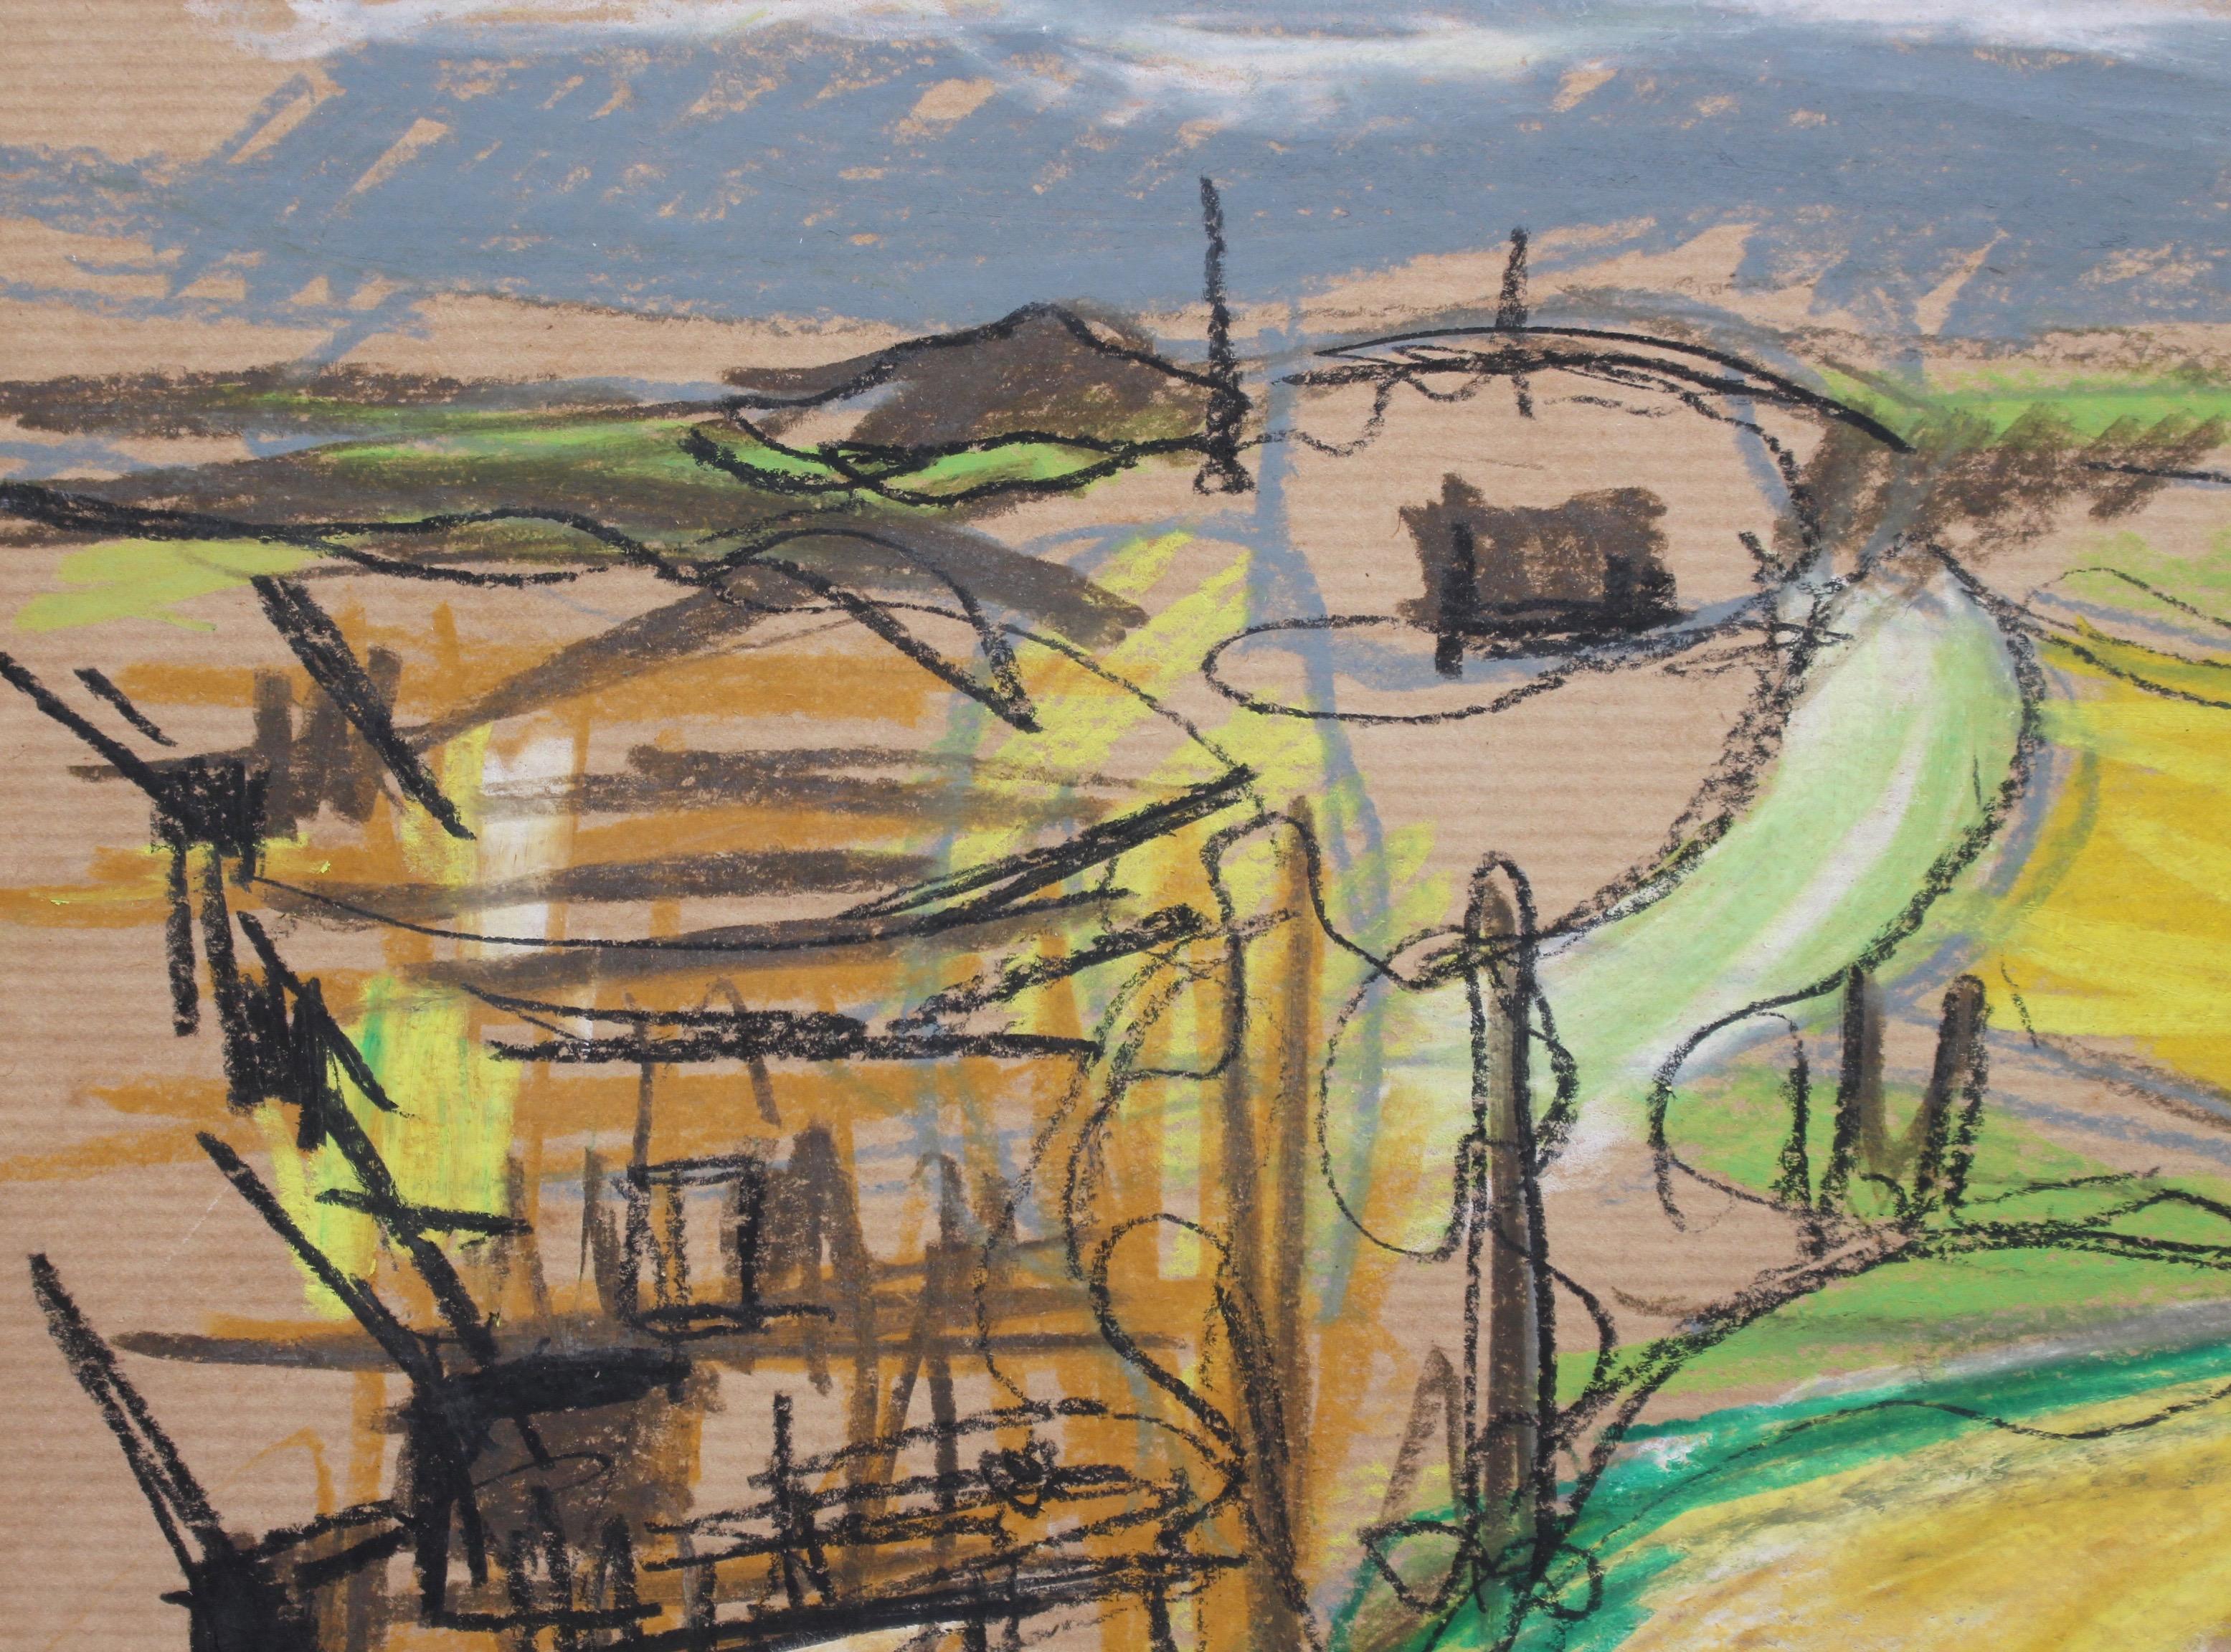 Scenic Landscape Overlook, wax crayon on brown paper, by French artist, Yves Amelin (circa 1970s). Executed completely in bright coloured crayons, this is a surprisingly sophisticated modern work of art which belies one's initial impression that it